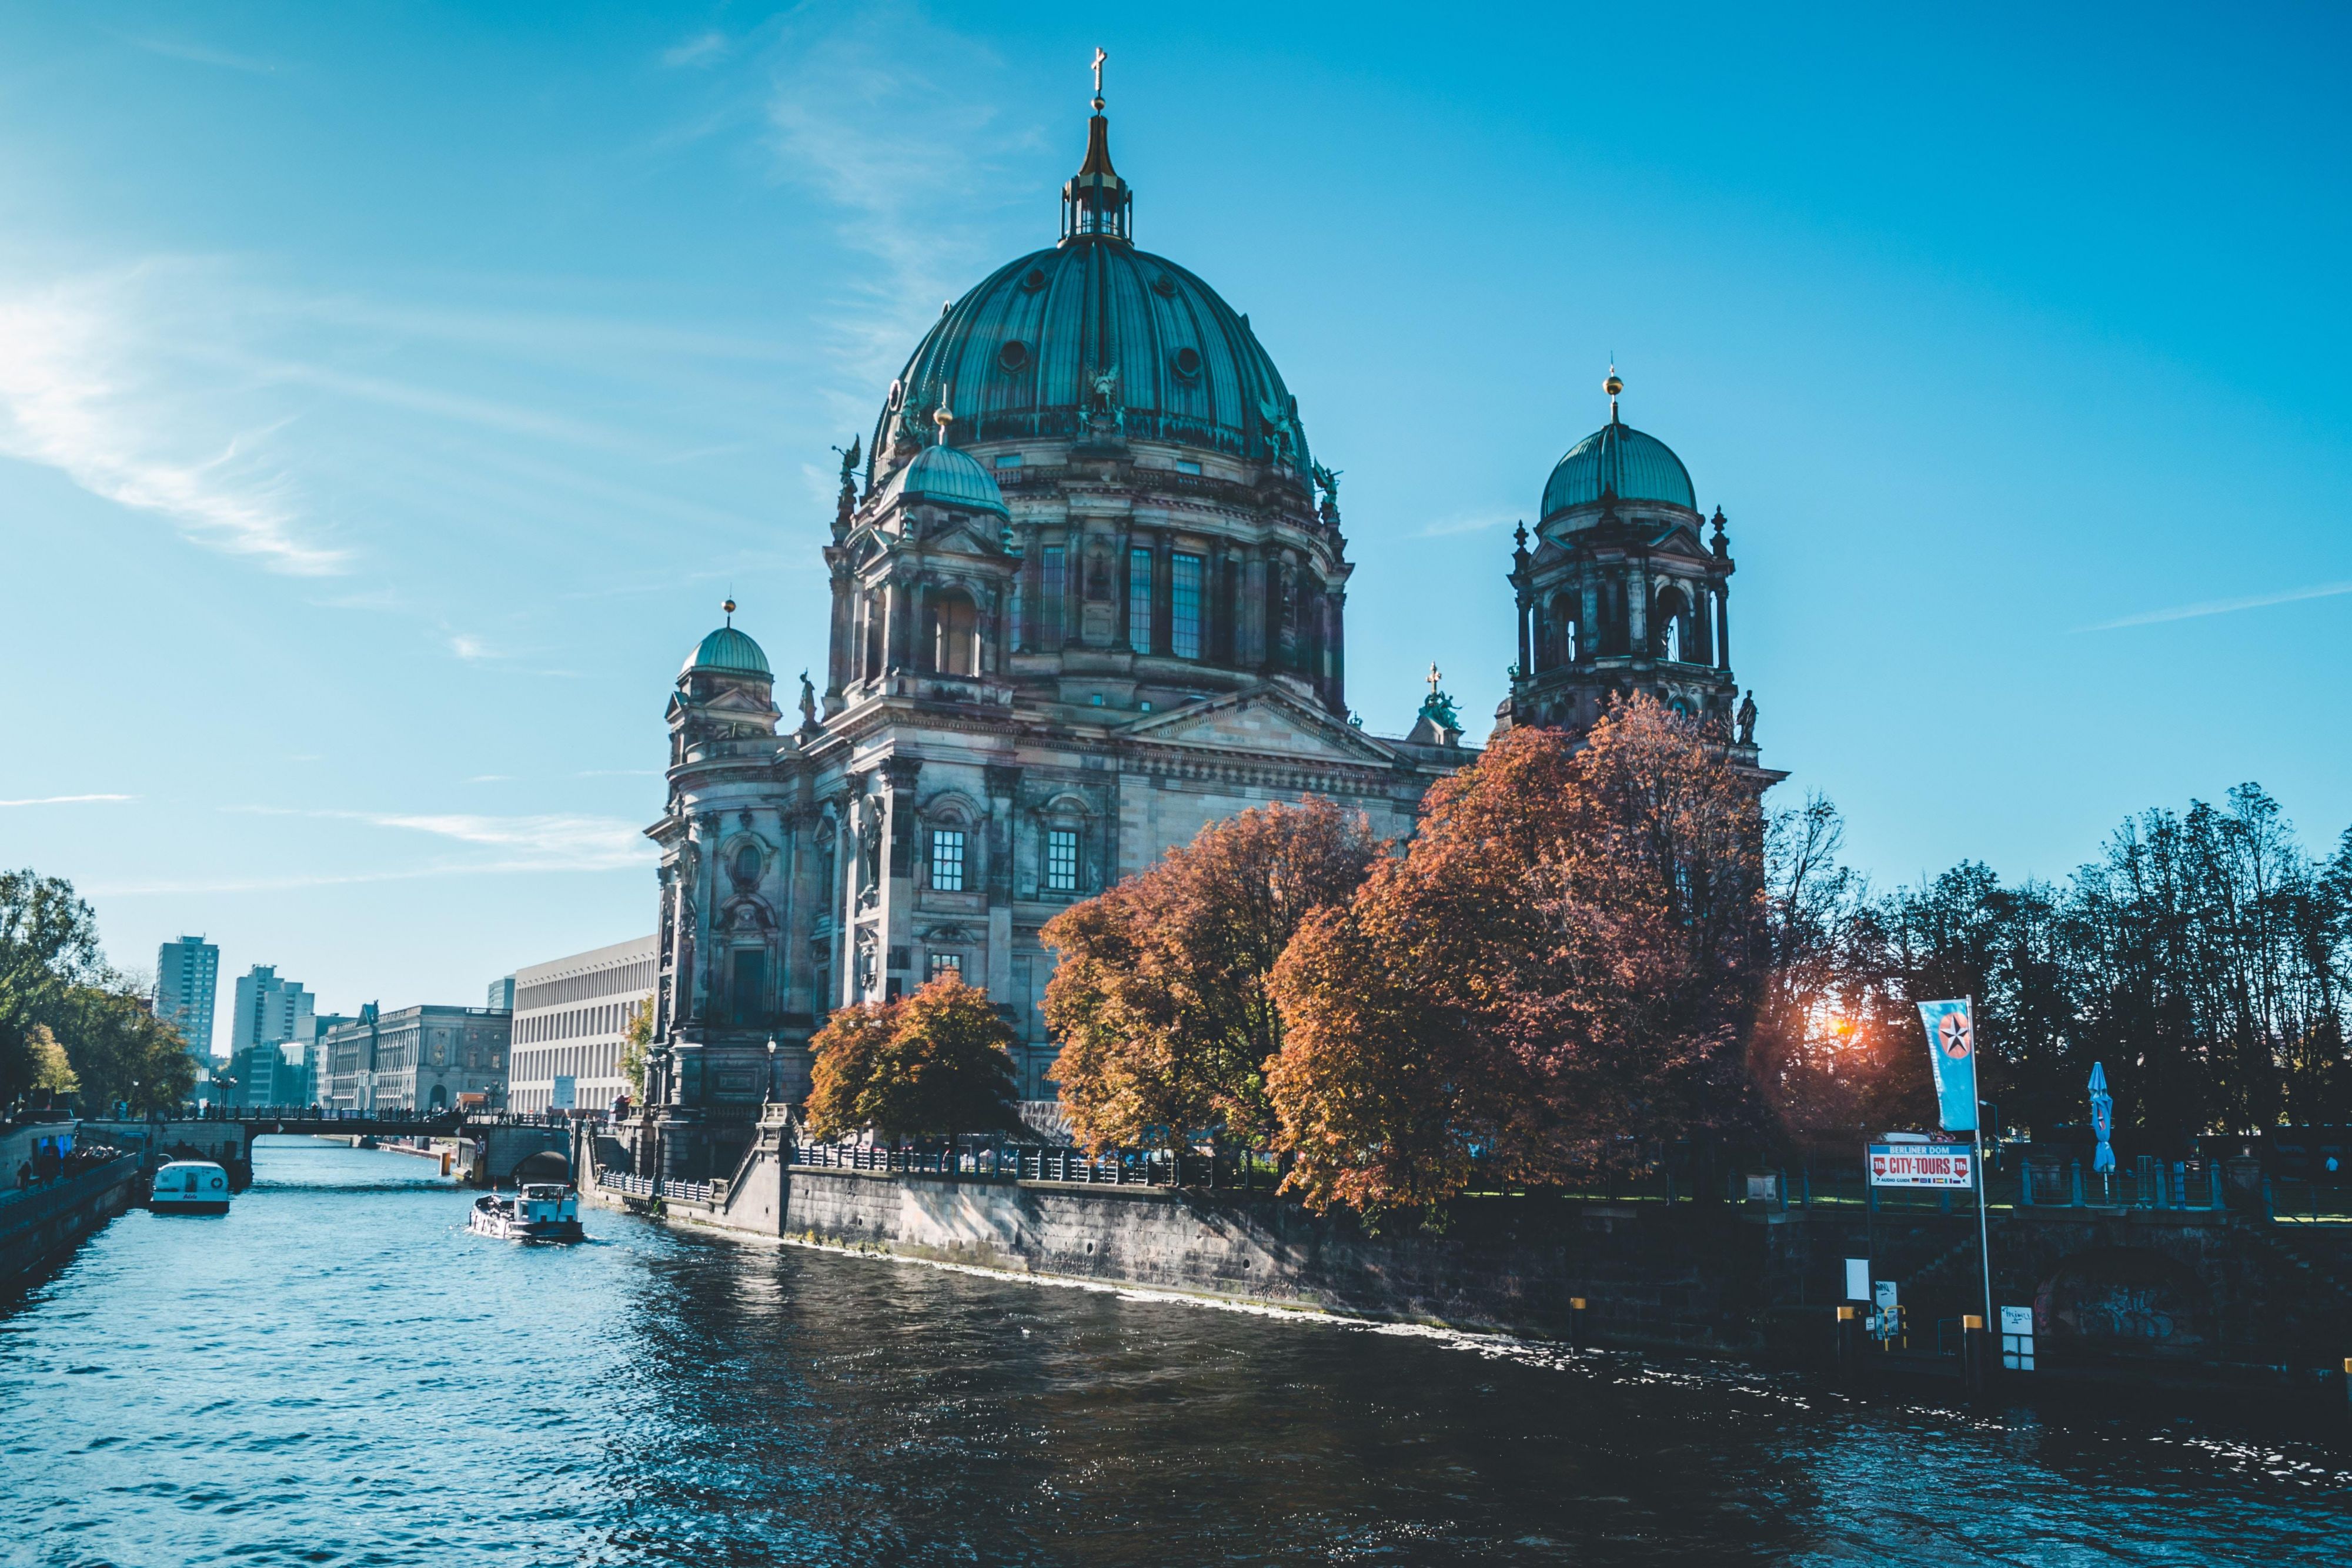 Discover Berlin by boat. Sit back, enjoy the sun and the breeze while enjoying a sightseeing tour on the water, passing by famous landmarks. For further information, please feel free to contact our team members.